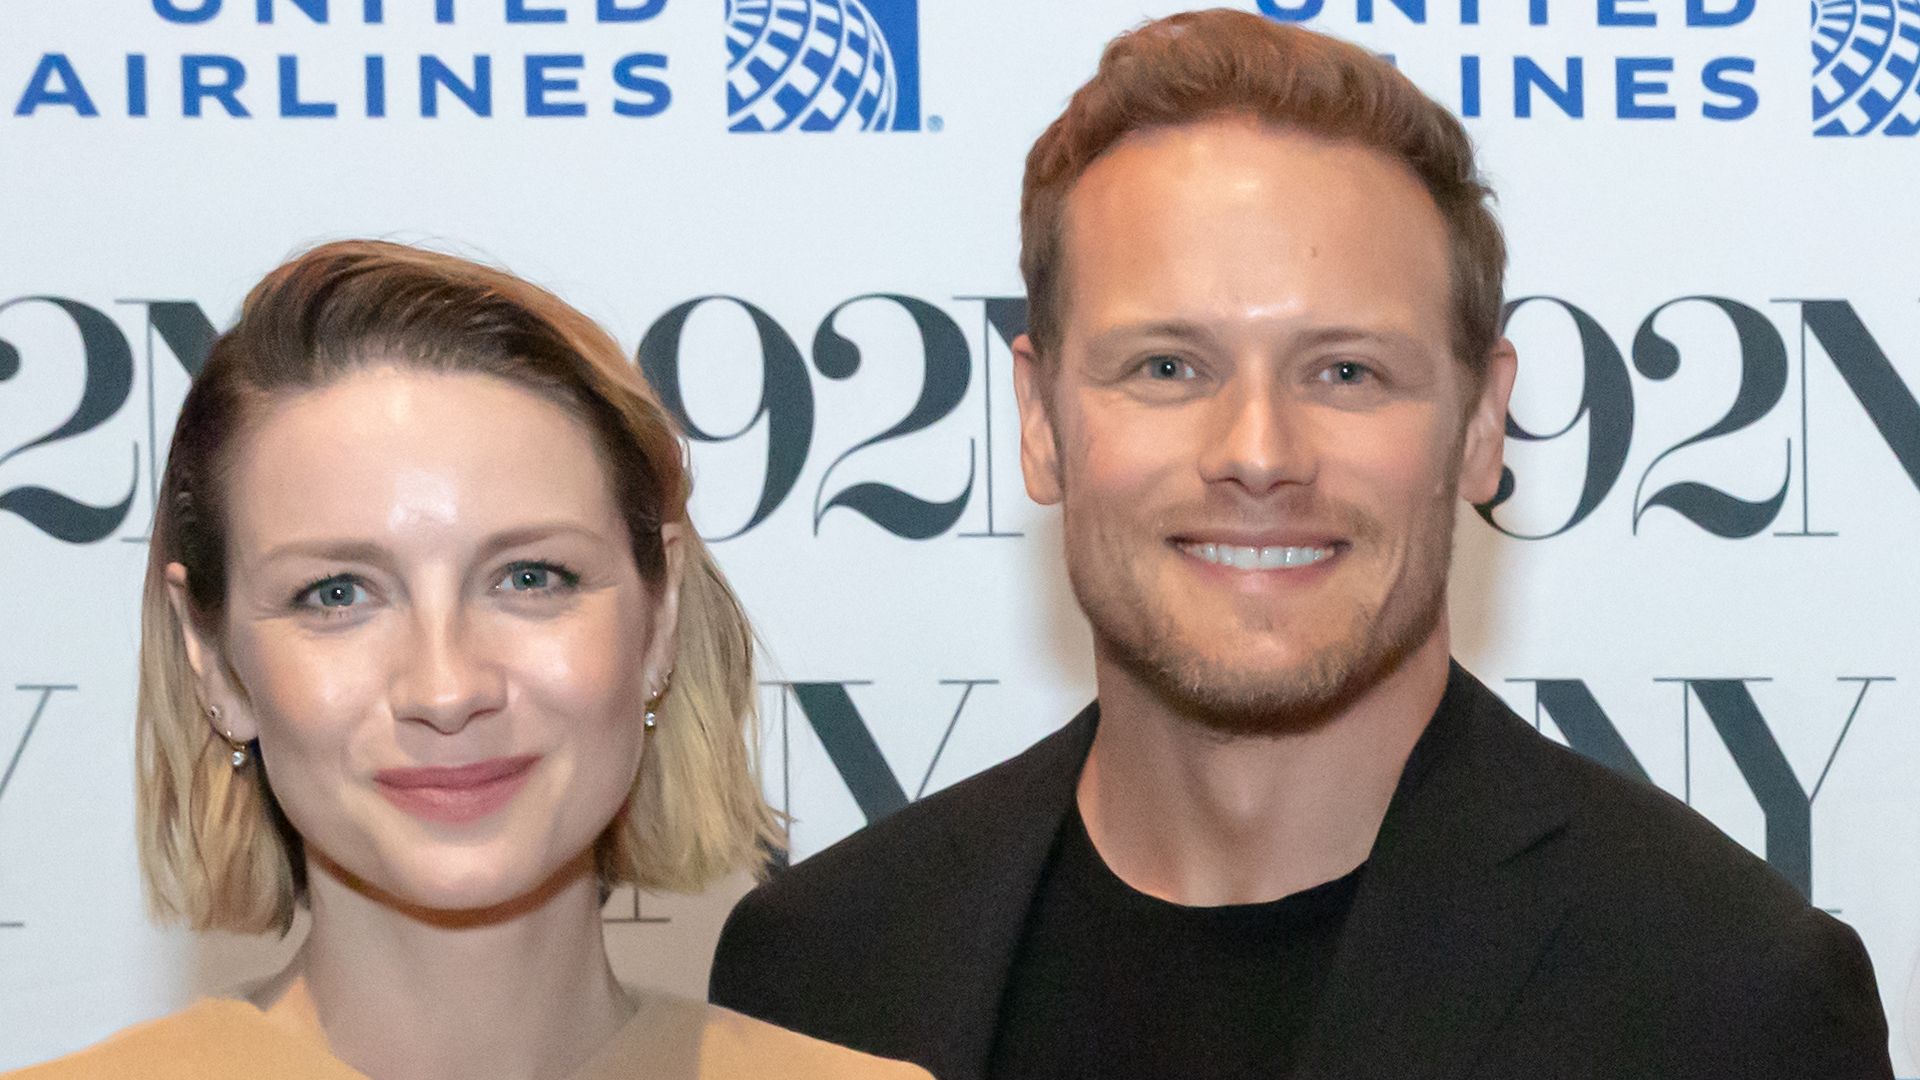 Sam Heughan and Caitriona Balfe smiling on a red carpet